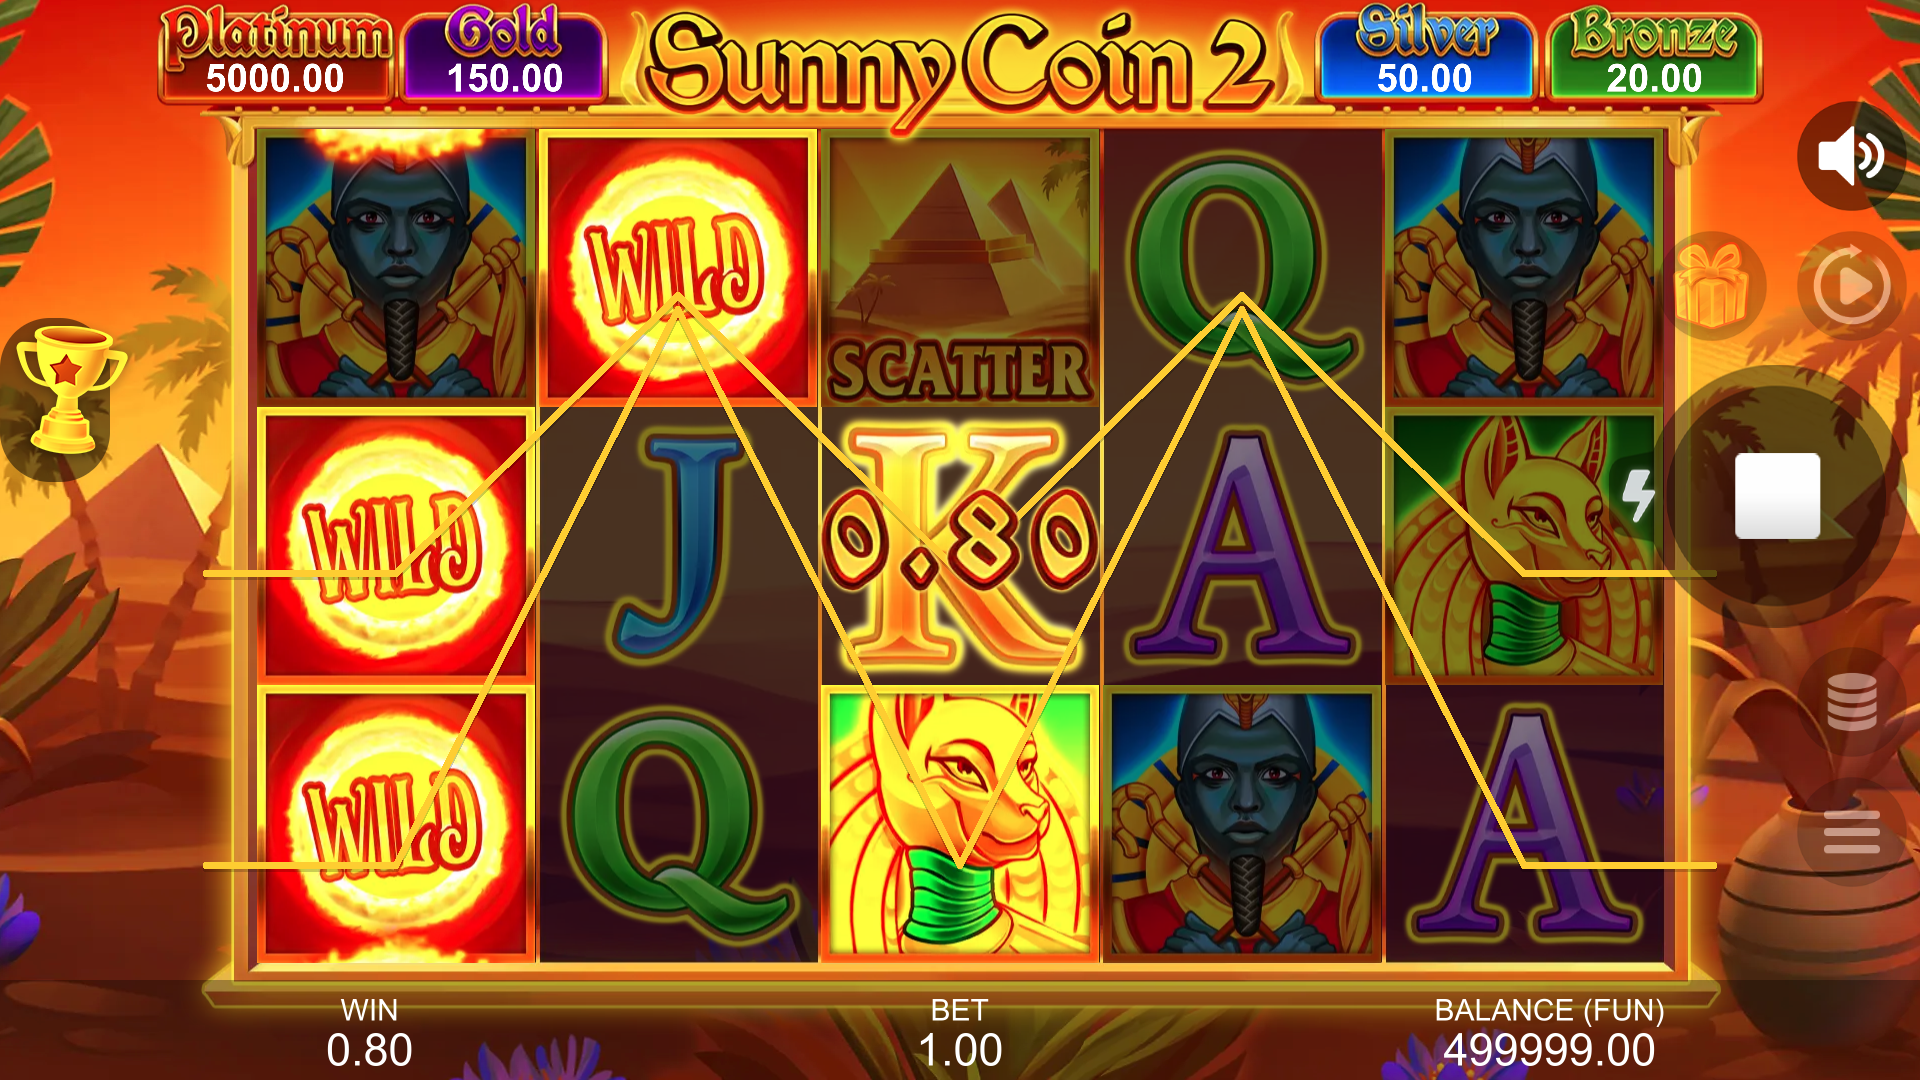 Sunny Coin 2: Hold the Spin Wild